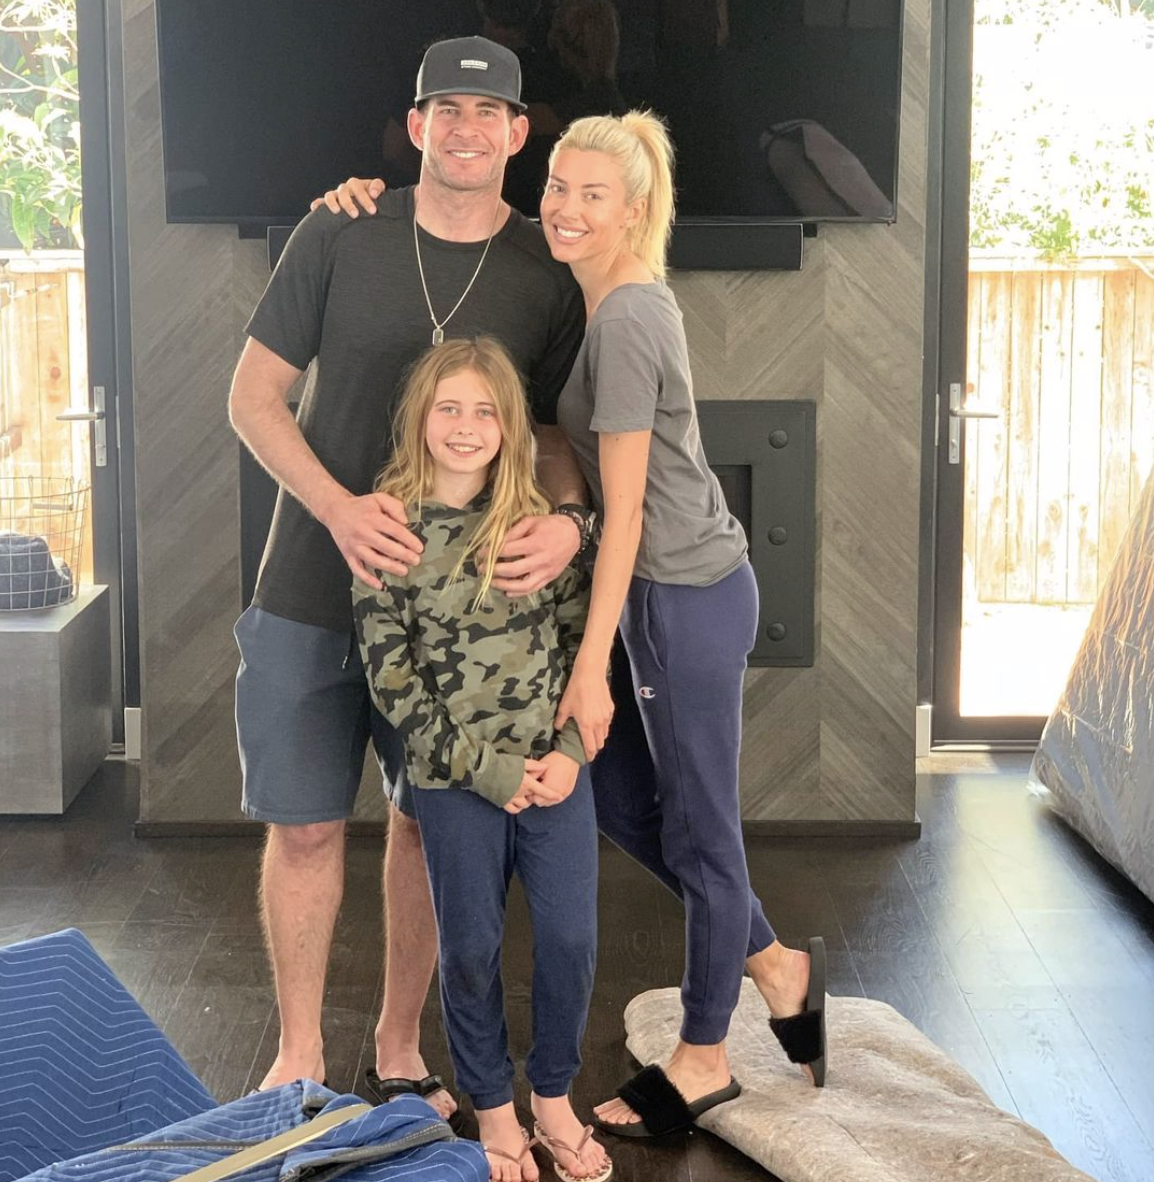 heather rae young, tarek el moussa, and taylor reese standing  in living room